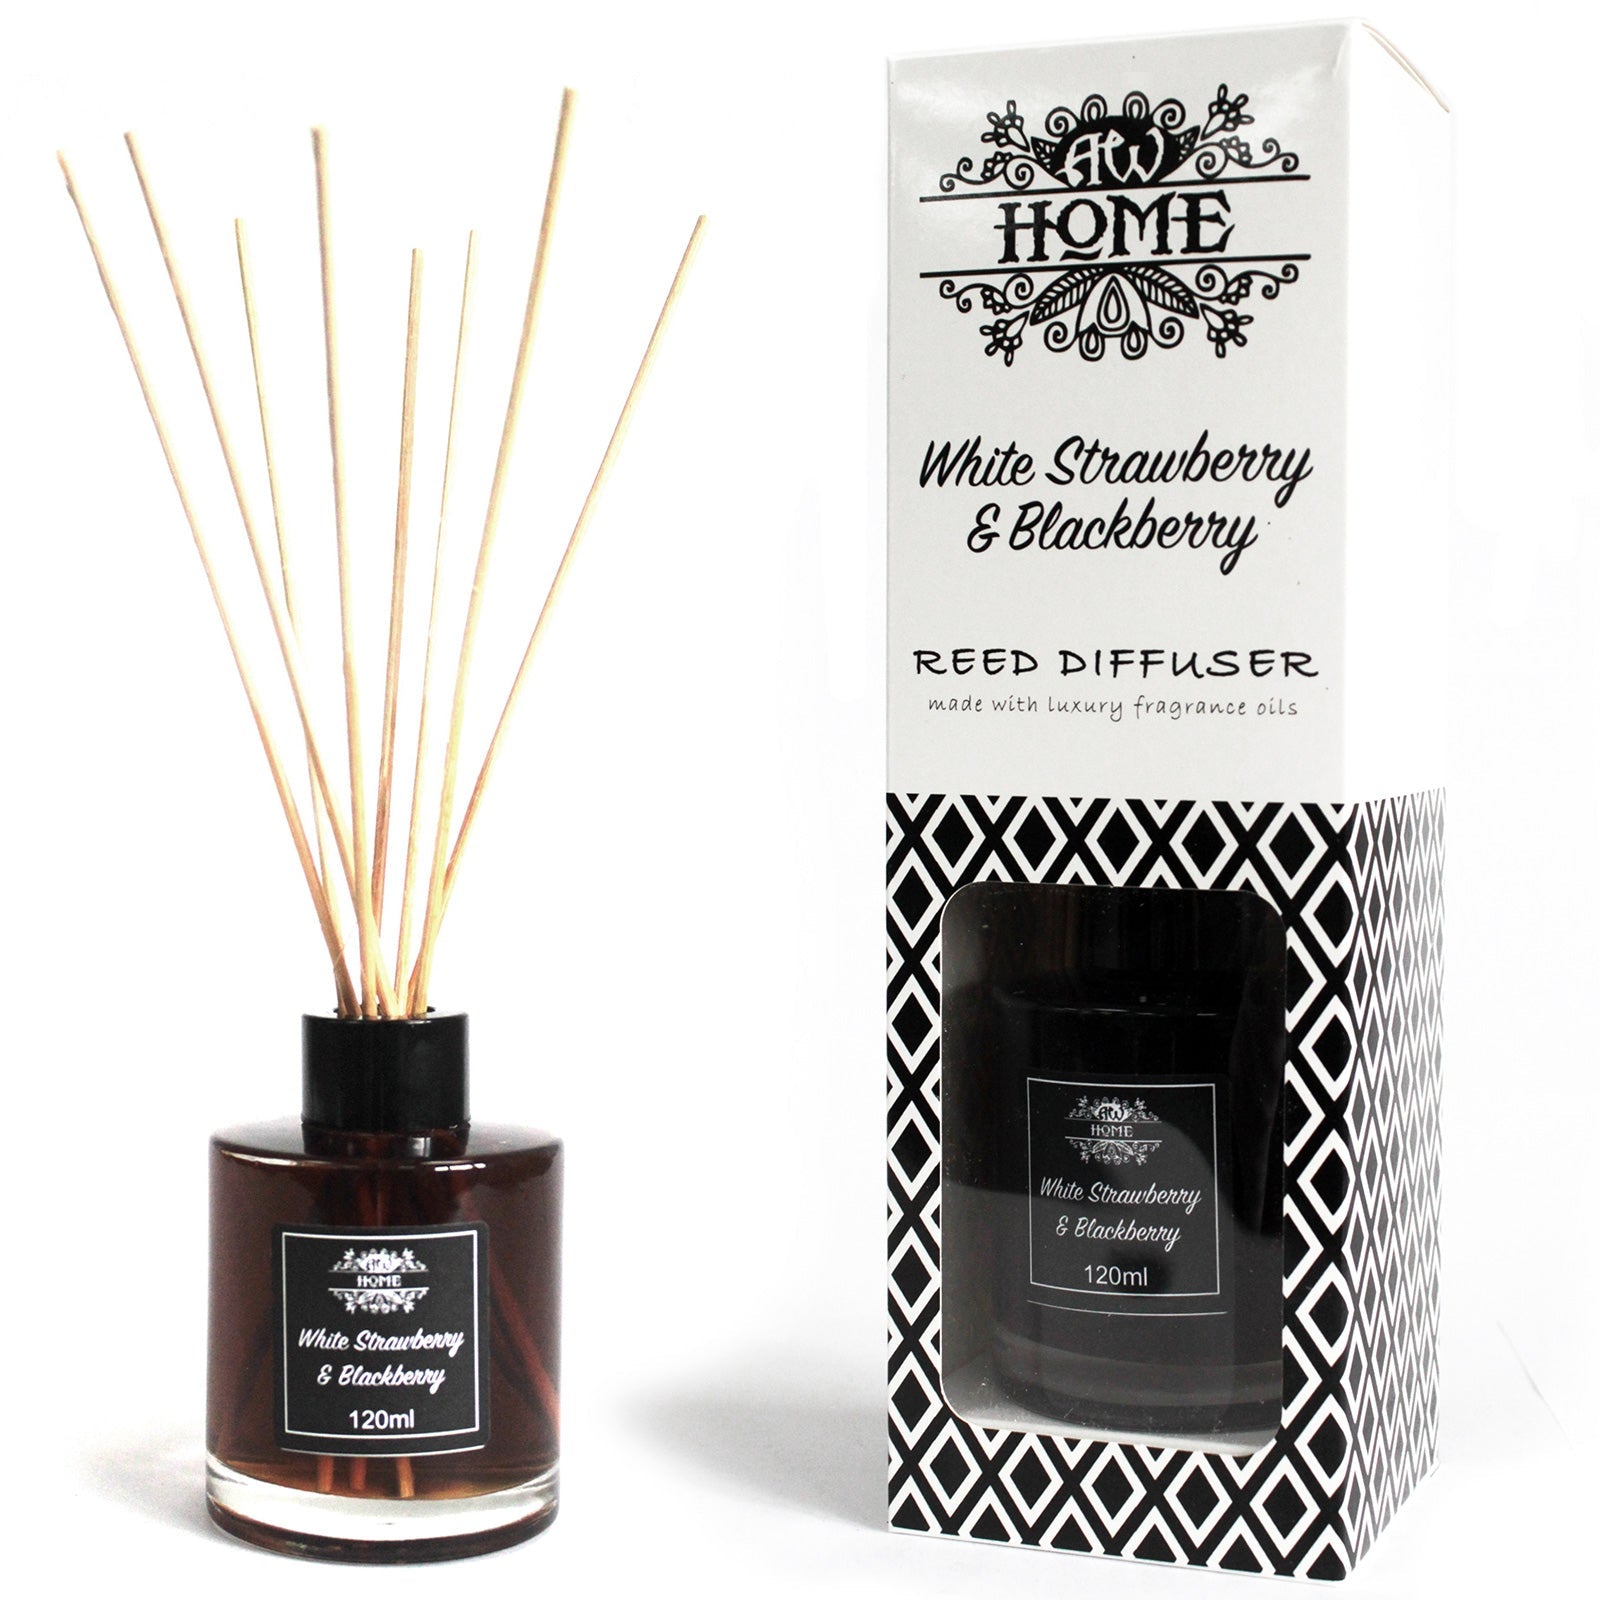 Home Fragrance Reed Diffuser - Various Fragrances - 120ml Home Fragrance Reed Diffusers - 120ml Soul Inspired White Strawberry & Blackberry 